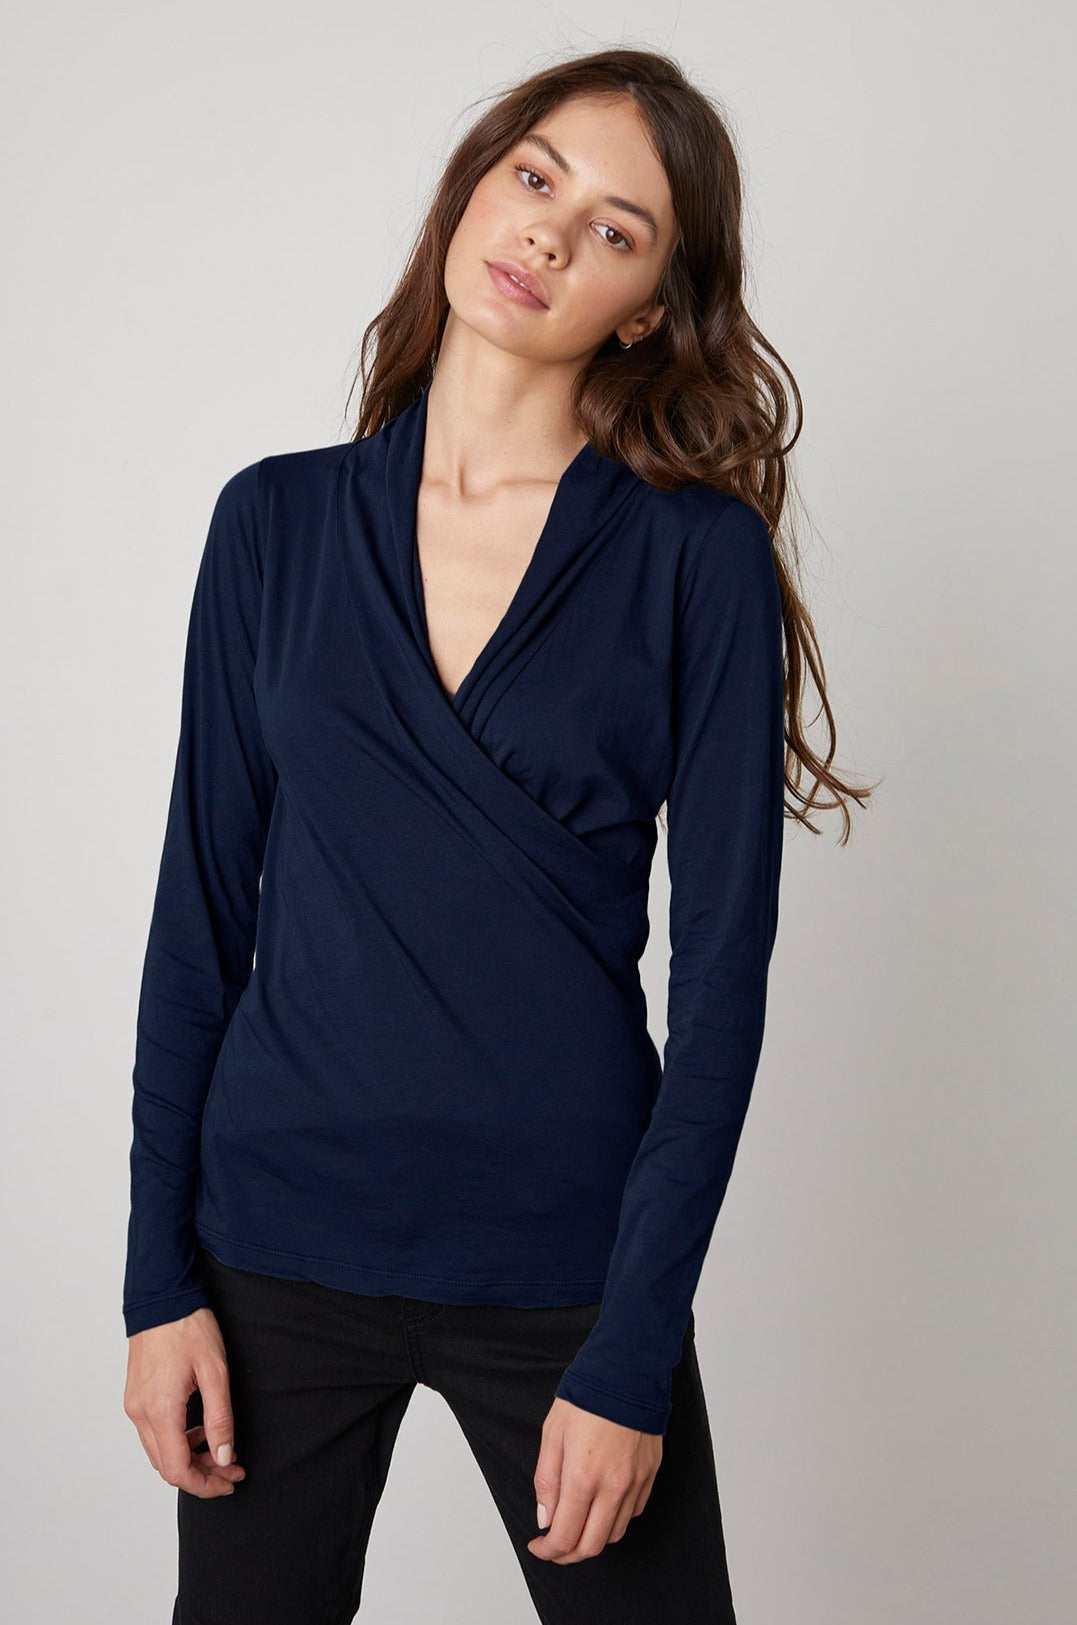 The model is wearing a Velvet by Graham & Spencer MERI WRAP FRONT FITTED TOP with a v - neck.-23013992792257